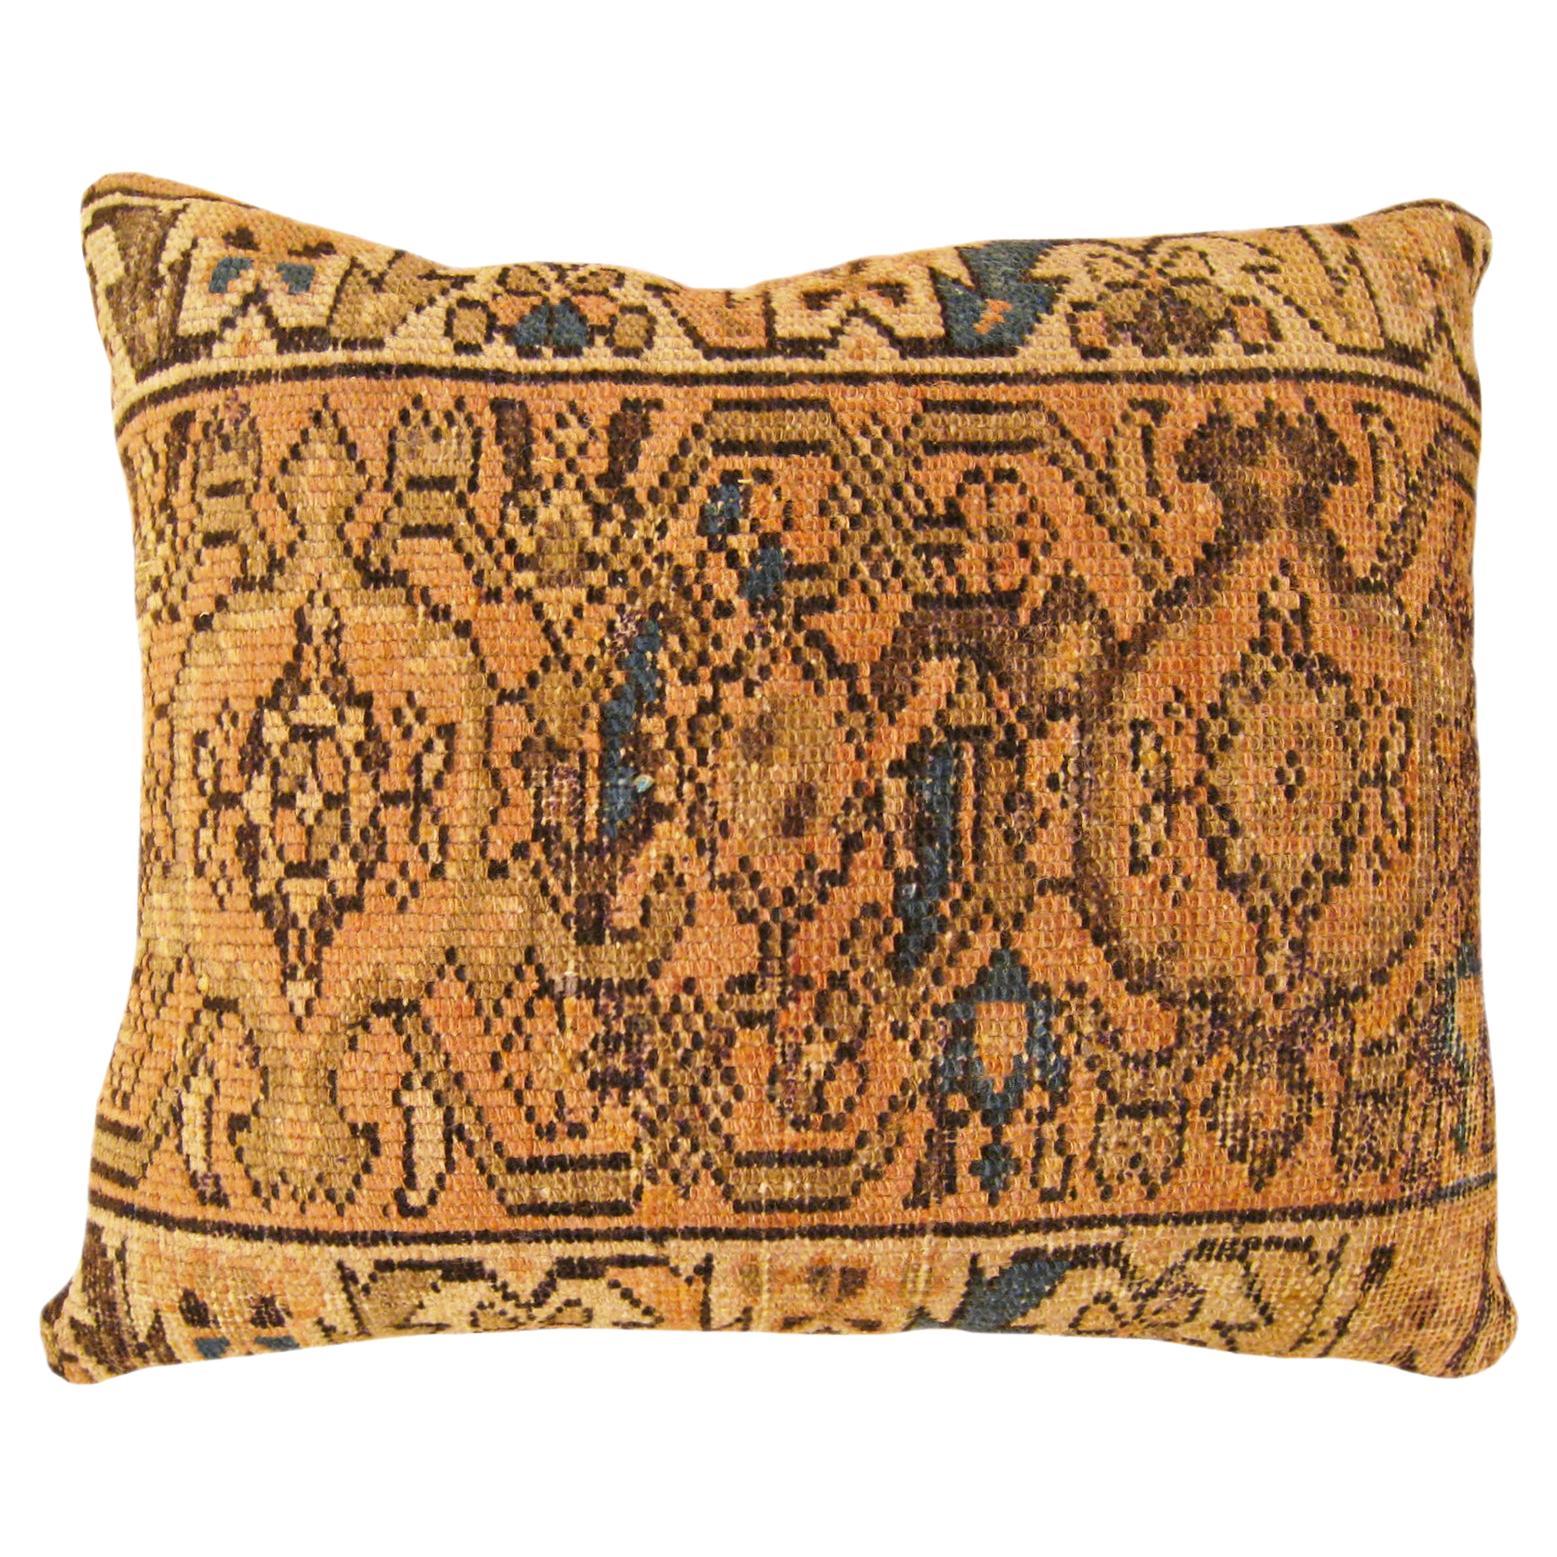  Decorative Antique Persian Hamadan Rug Pillow with Geometric Abstracts Allover For Sale